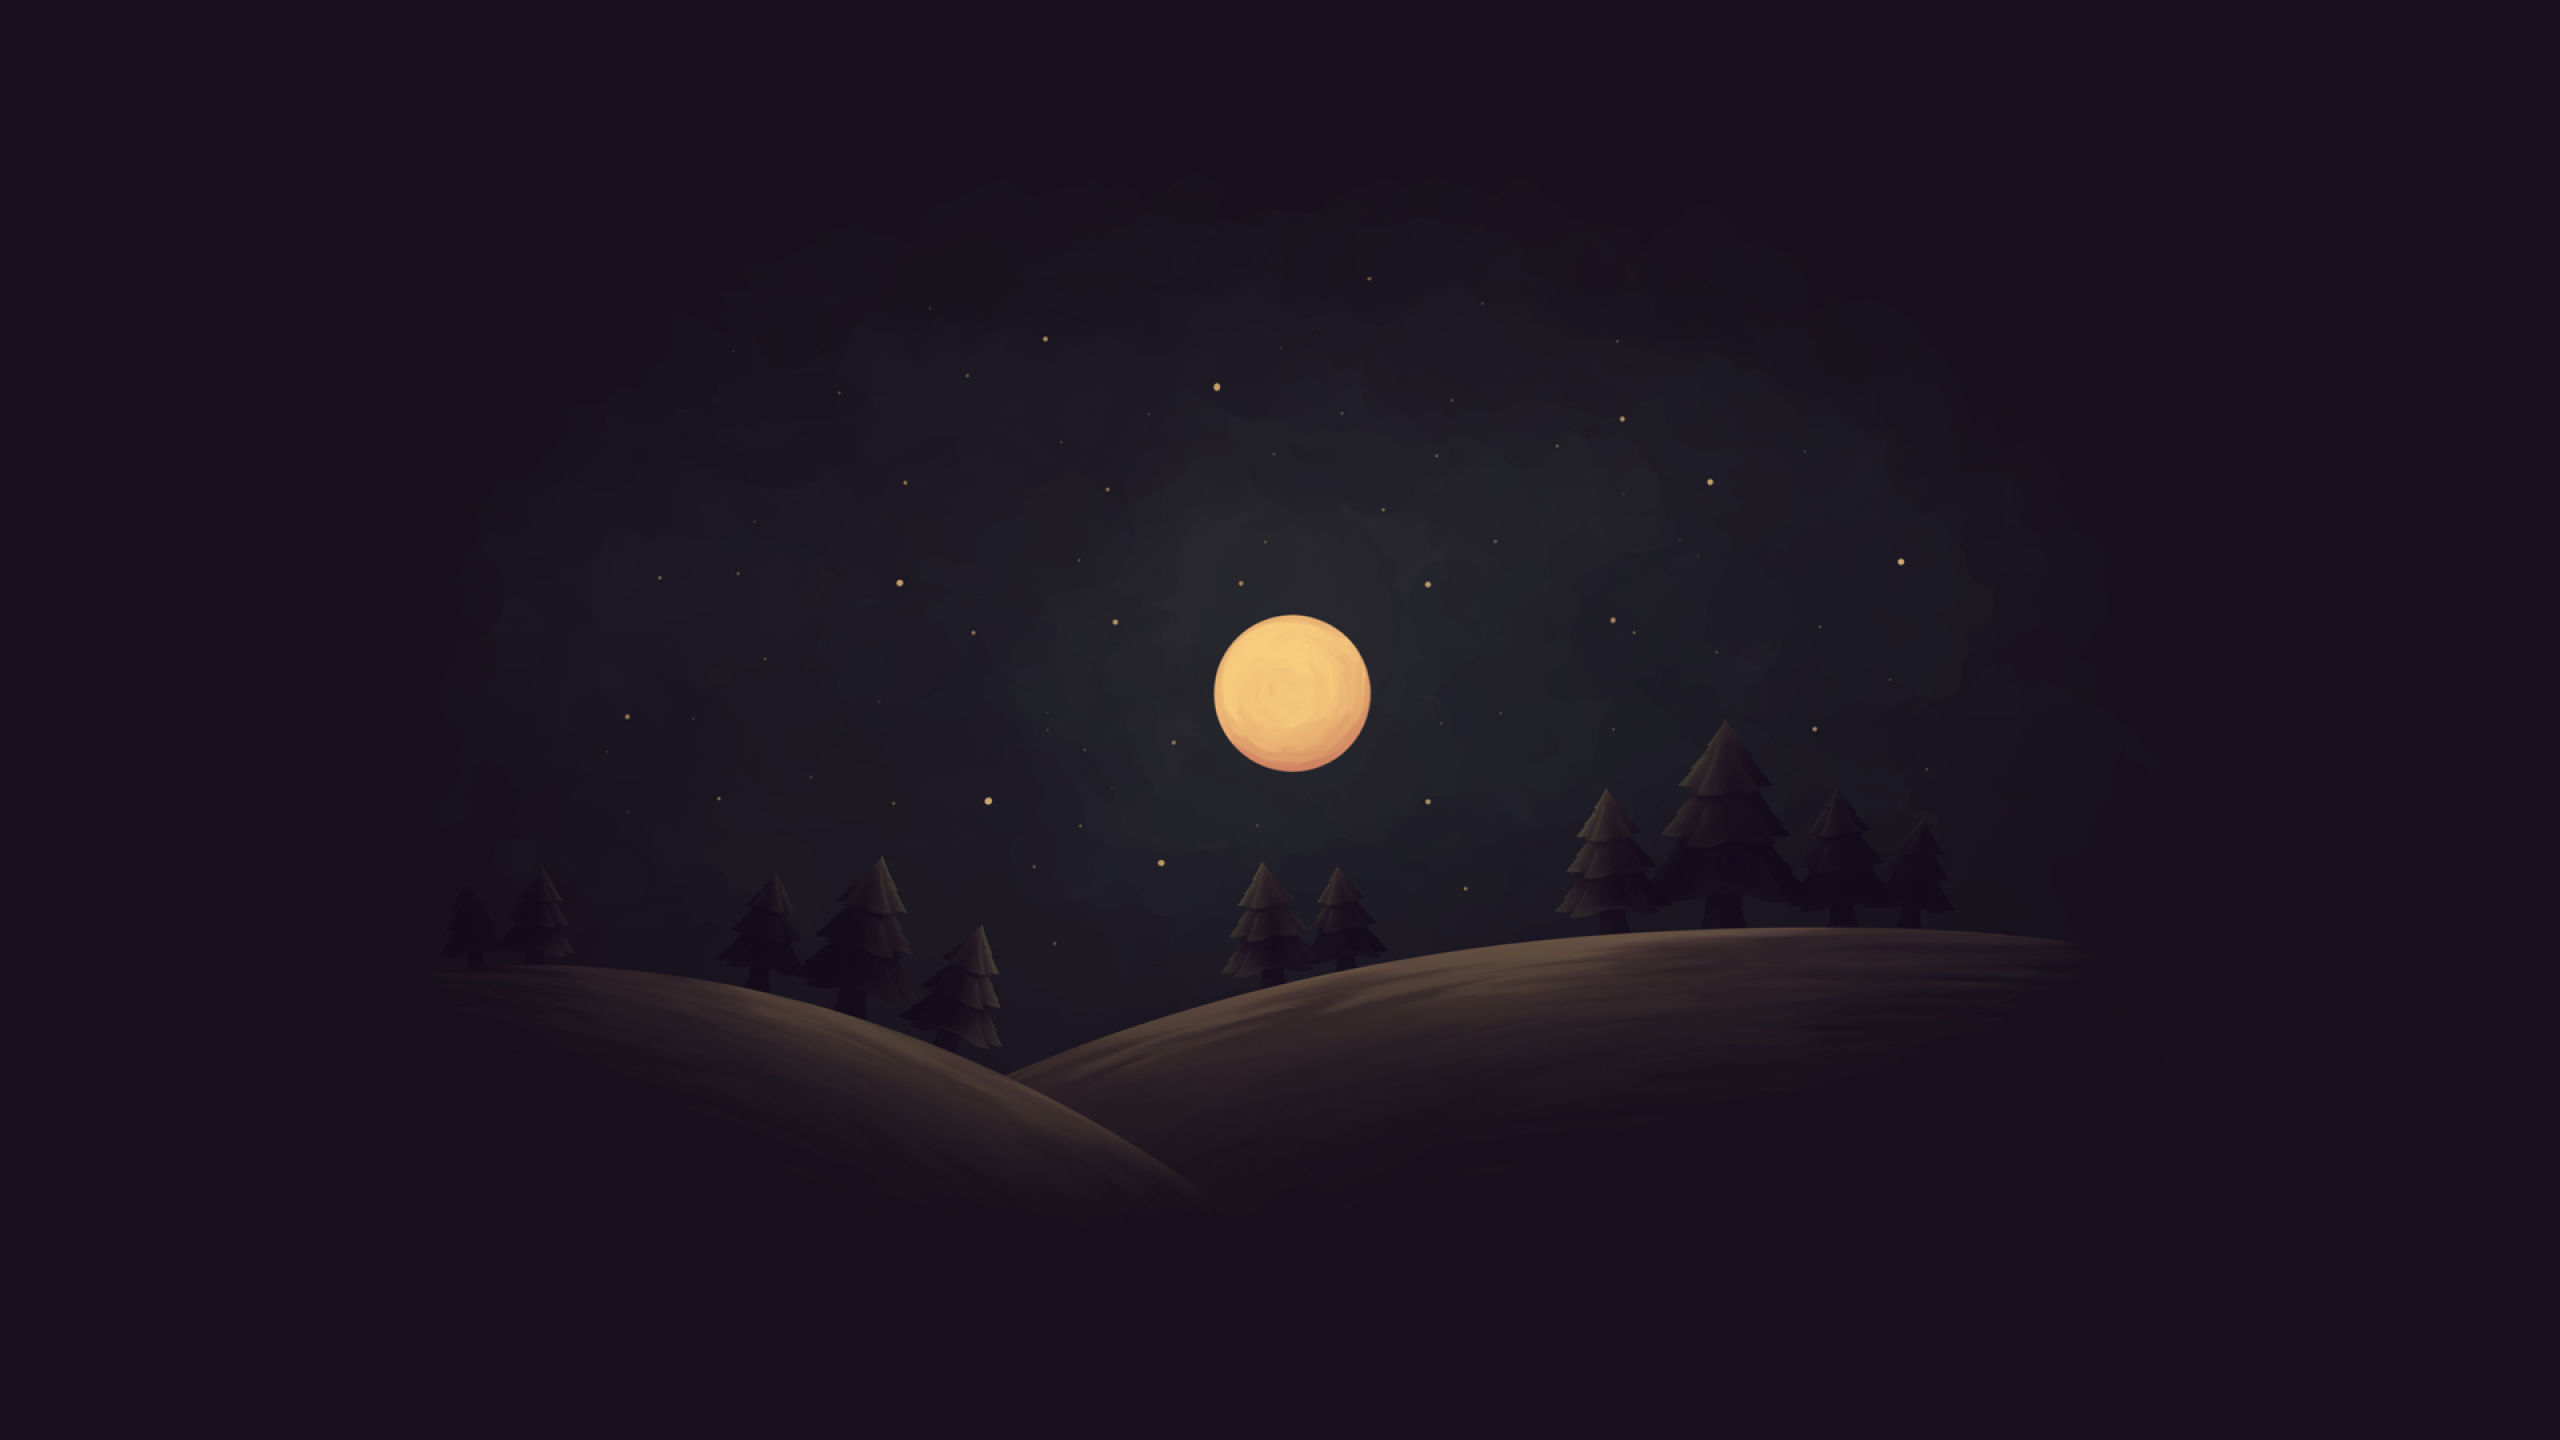 2560x1440 Simple Night 1440p Resolution Wallpaper Hd Artist 4k Wallpapers Images Photos And Background Wallpapers Den